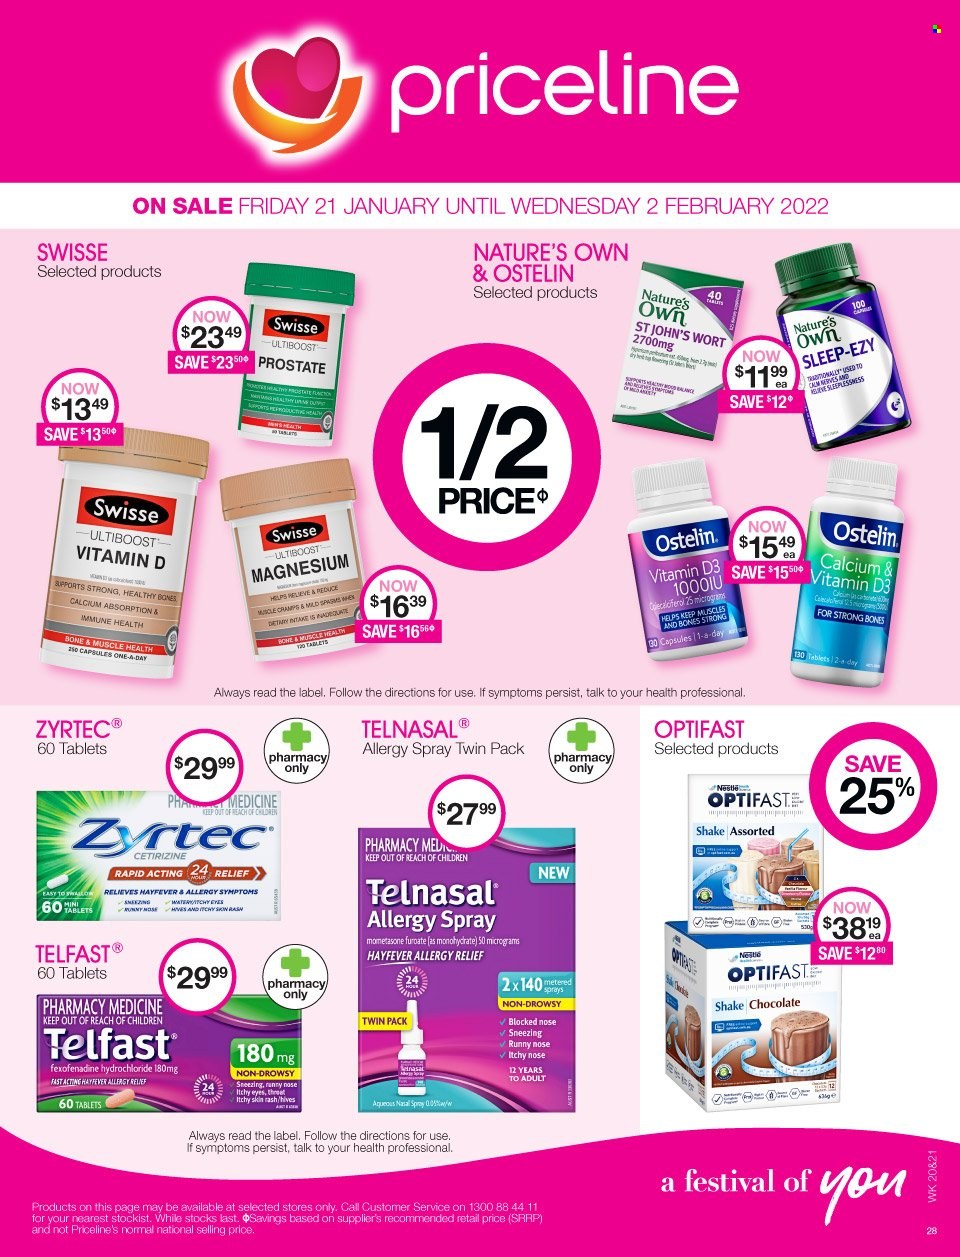 thumbnail - Priceline Pharmacy Catalogue - 21 Jan 2022 - 2 Feb 2022 - Sales products - Swisse, calcium, magnesium, Nestlé, Zyrtec, Nature's Own, vitamin D3, Ostelin, allergy relief, Telfast. Page 28.